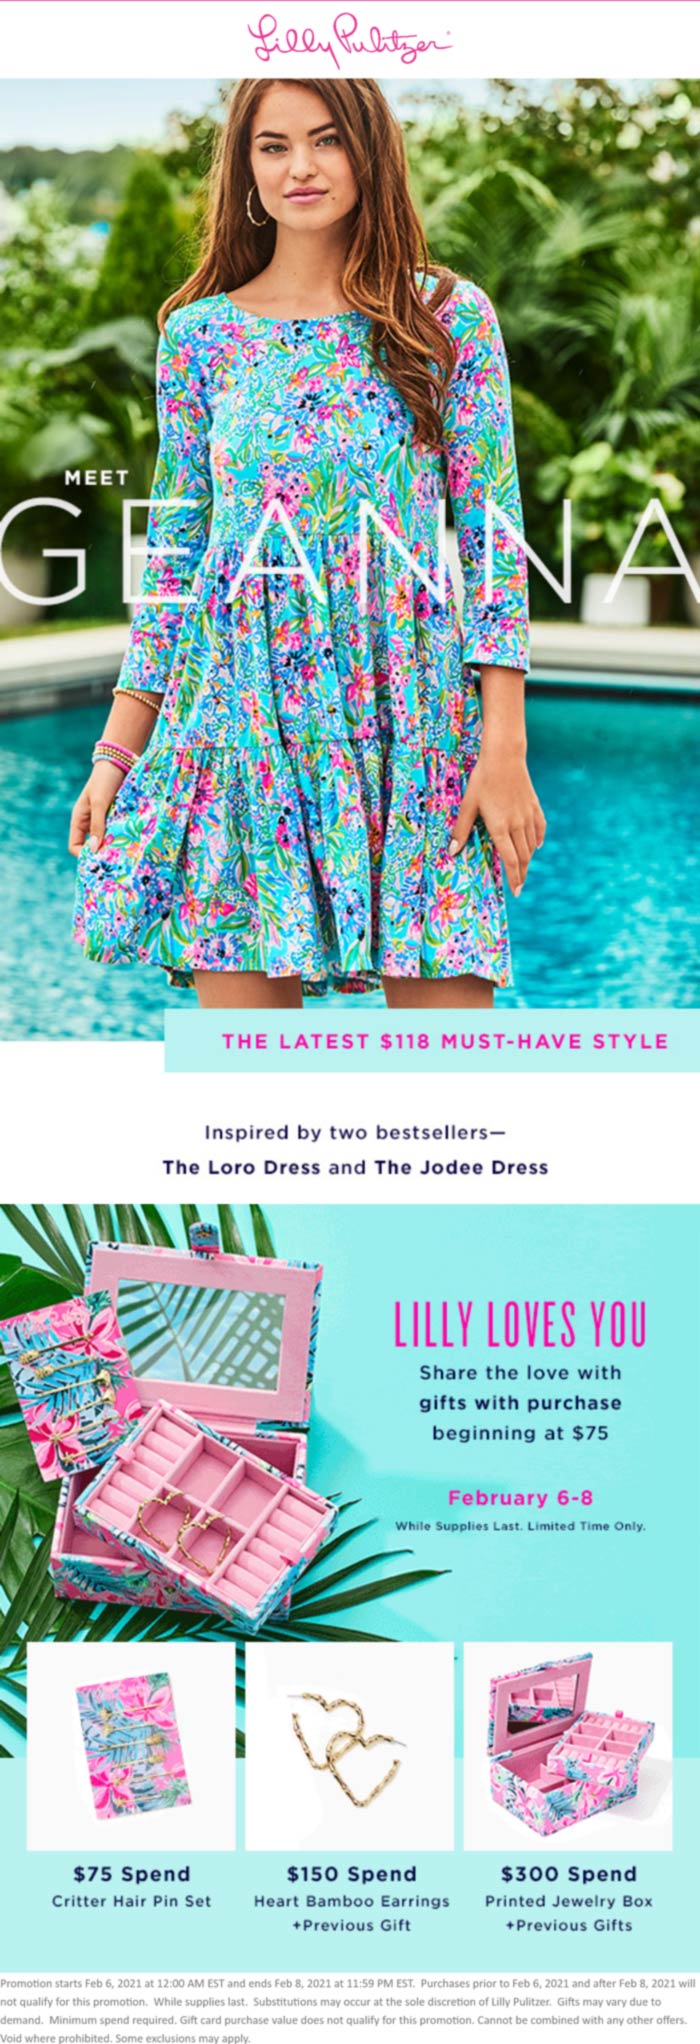 Lilly Pulitzer stores Coupon  Free hair pin set, earrings & jewelry box with $75-$300 spent at Lilly Pulitzer #lillypulitzer 